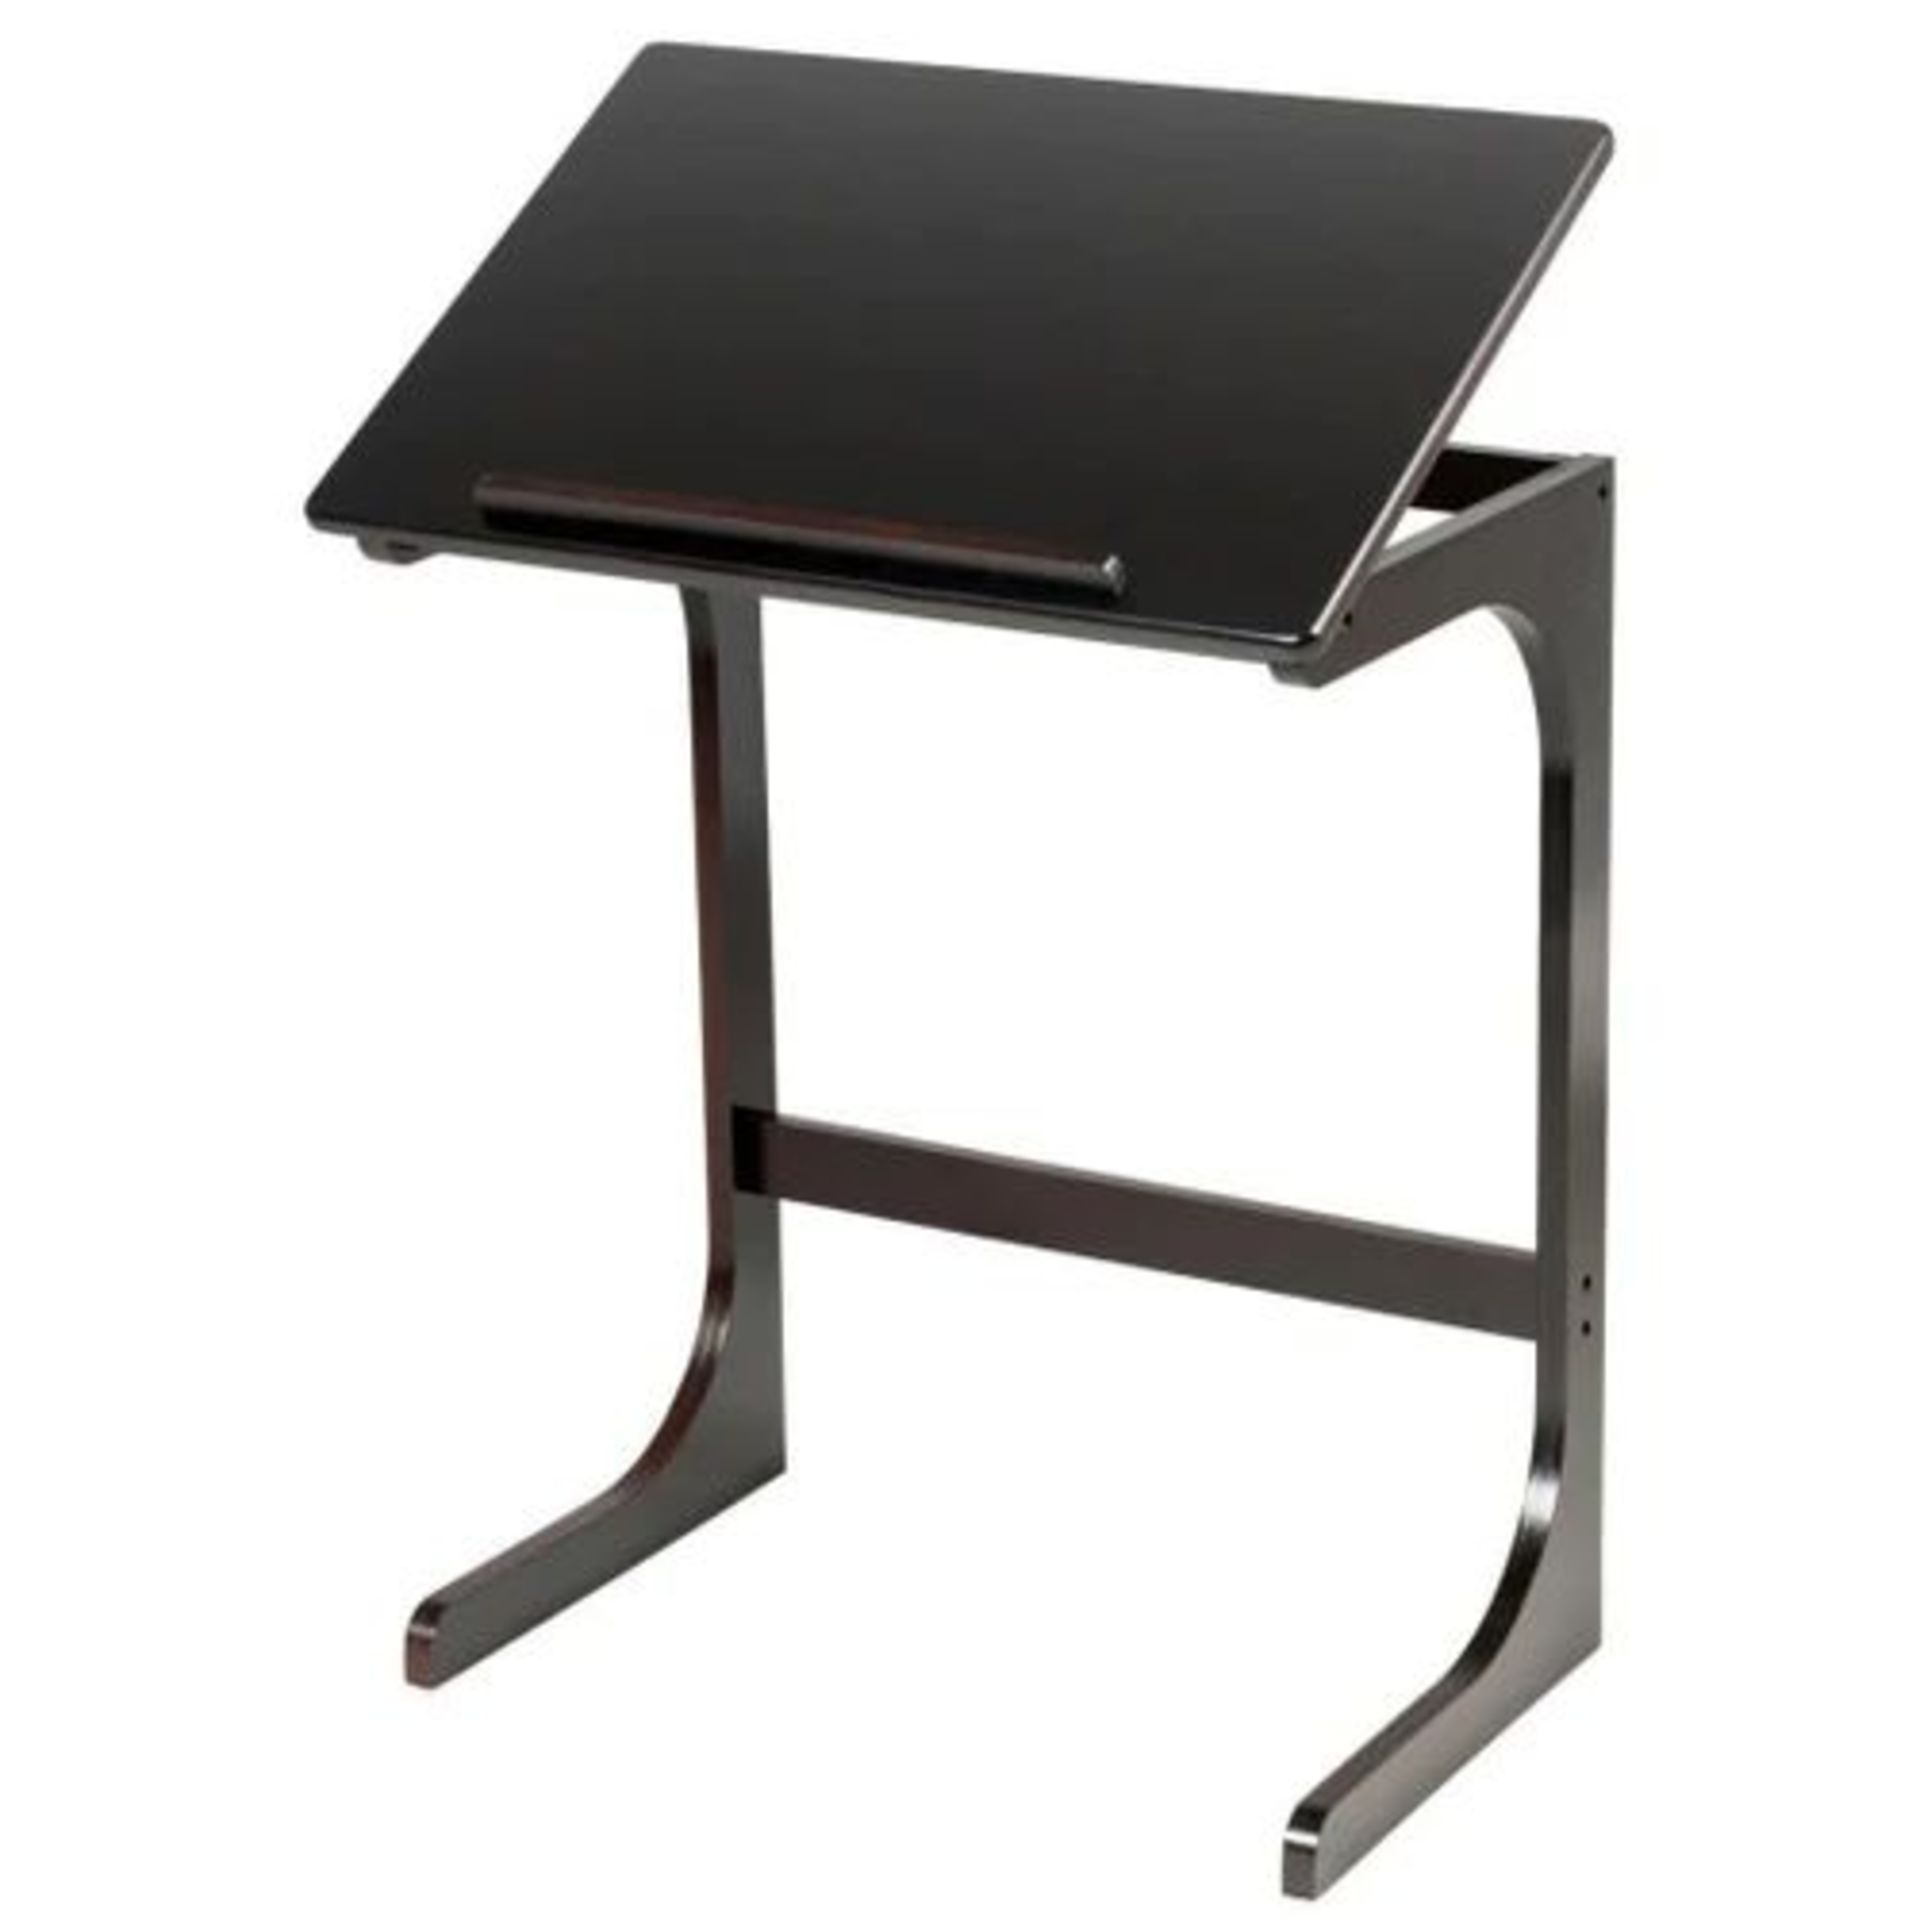 Adjustable C-Shape Couch End Table wth Tilting Top. - ER25. This is the multifunctional end table